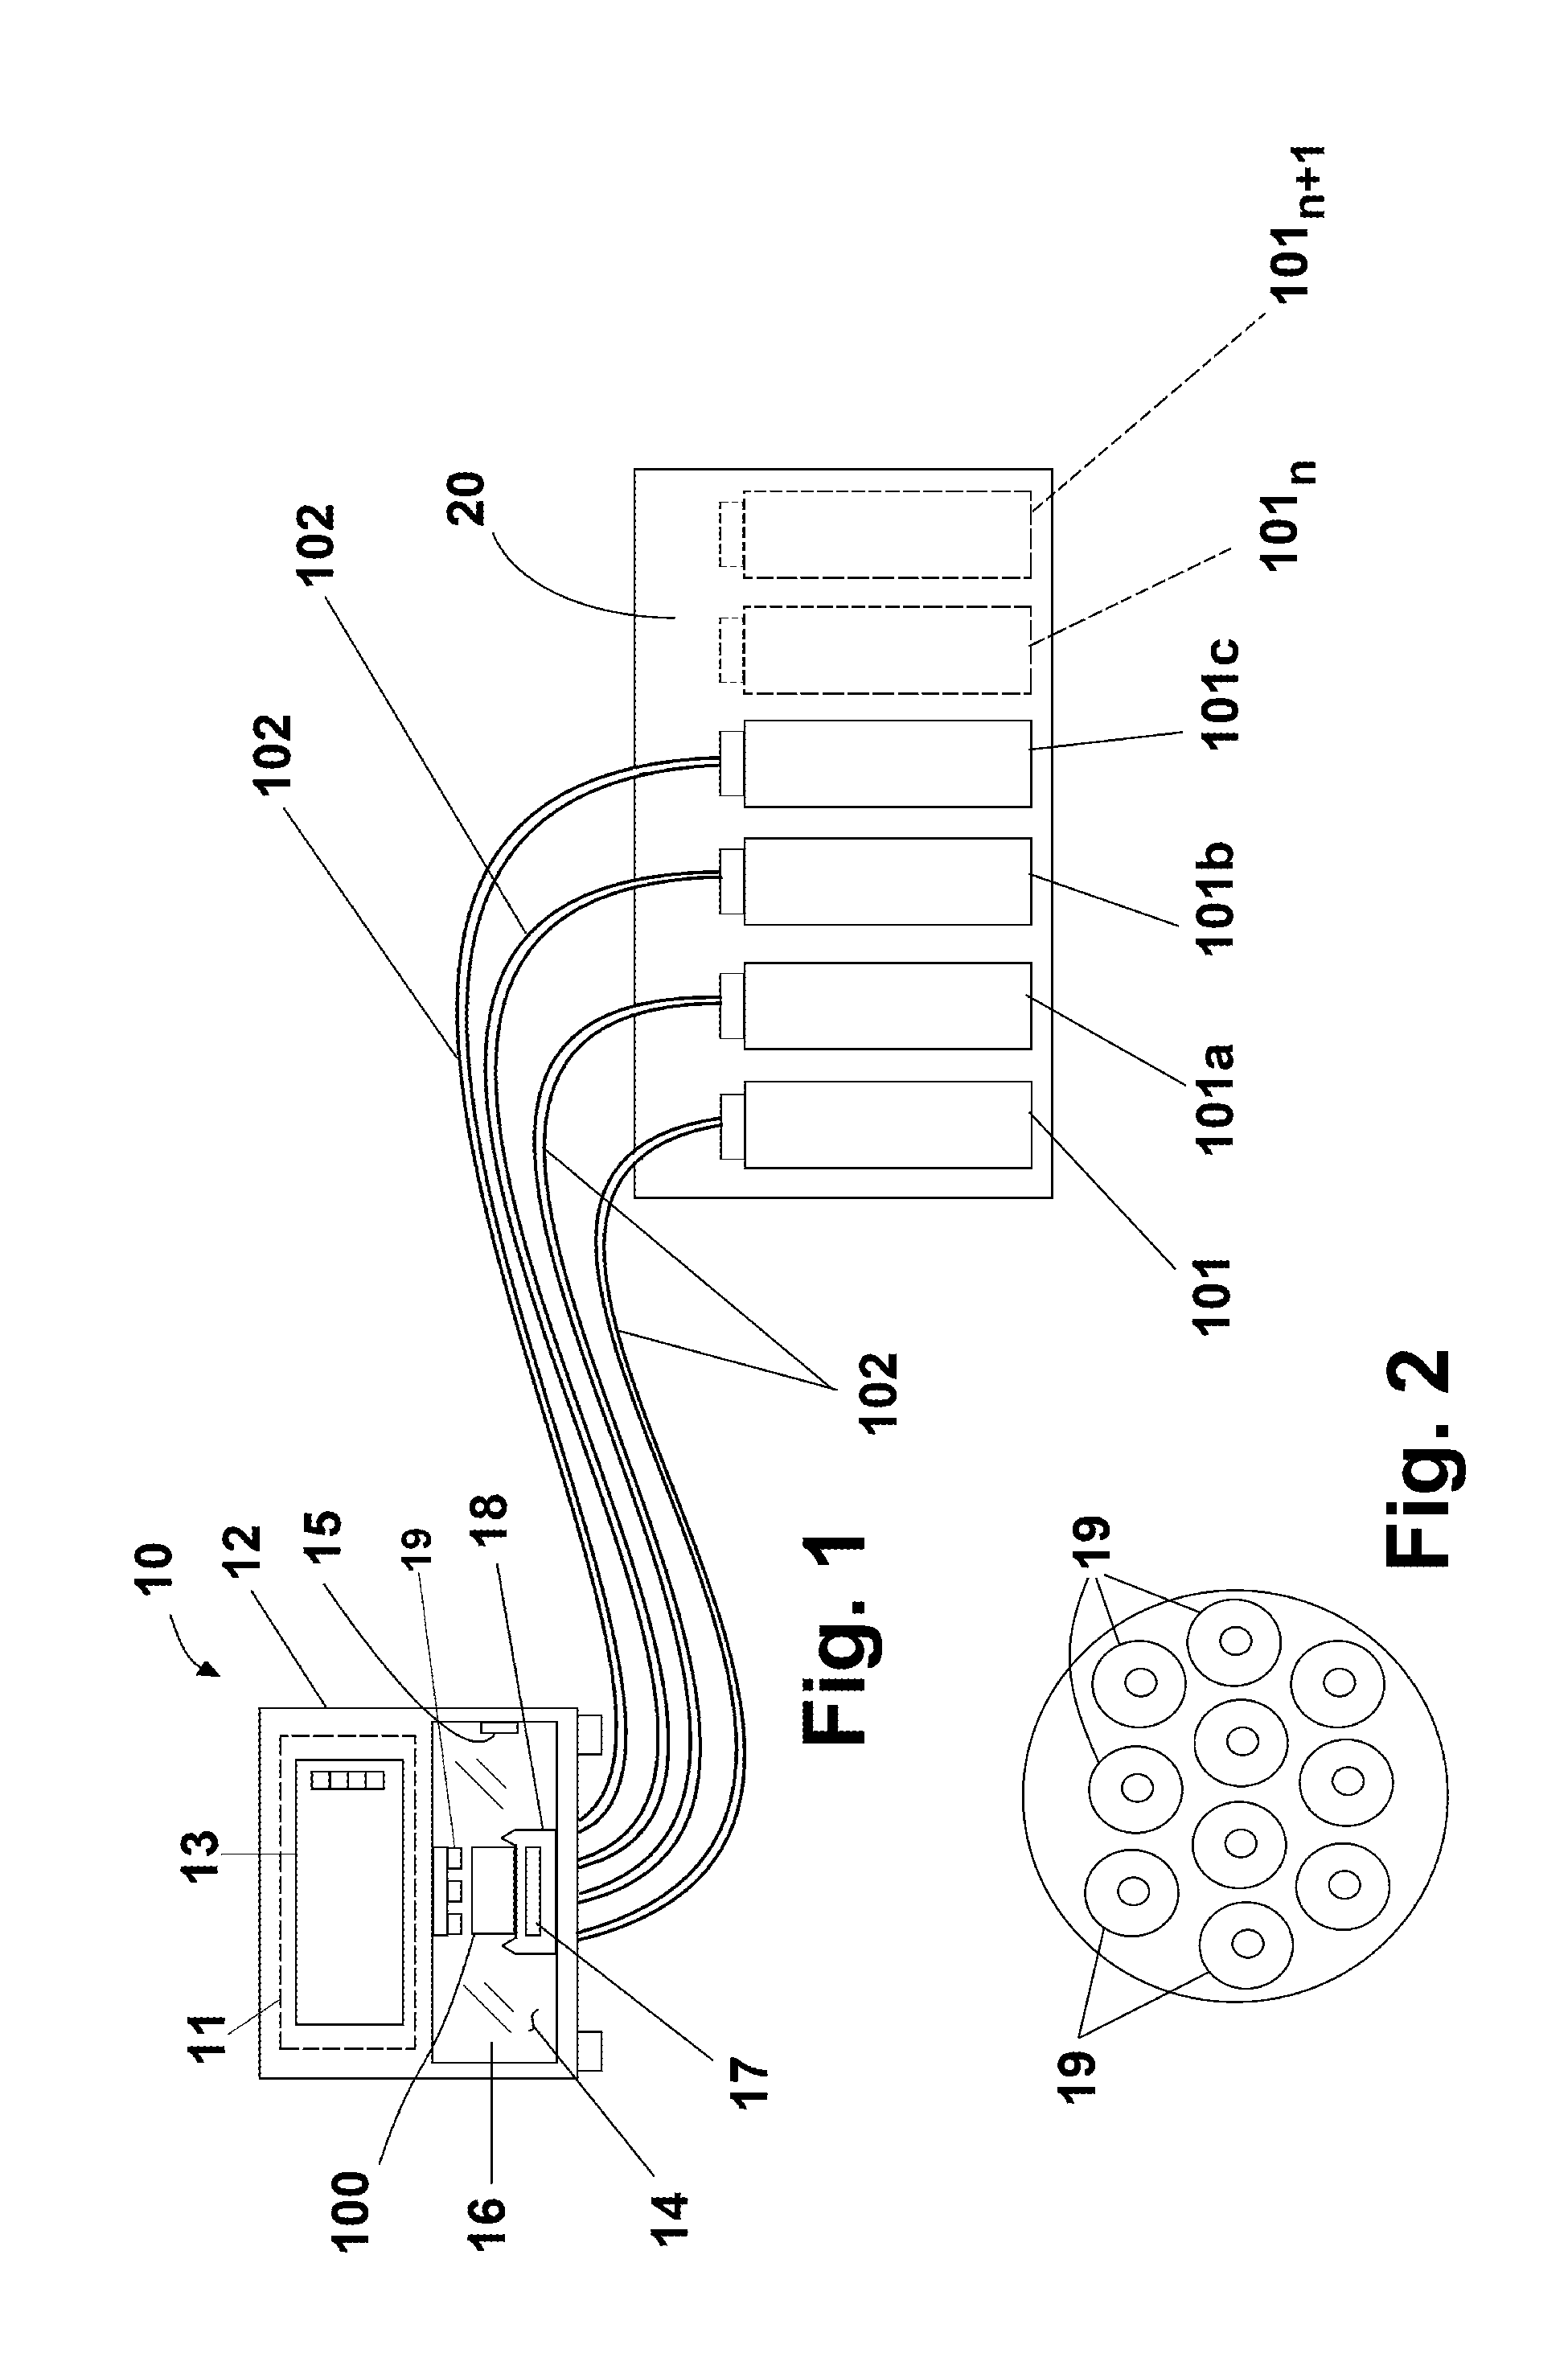 Method, system and apparatus for dispensing products for a personal care service, instructing on providing a personal care treatment service, and selecting a personal care service